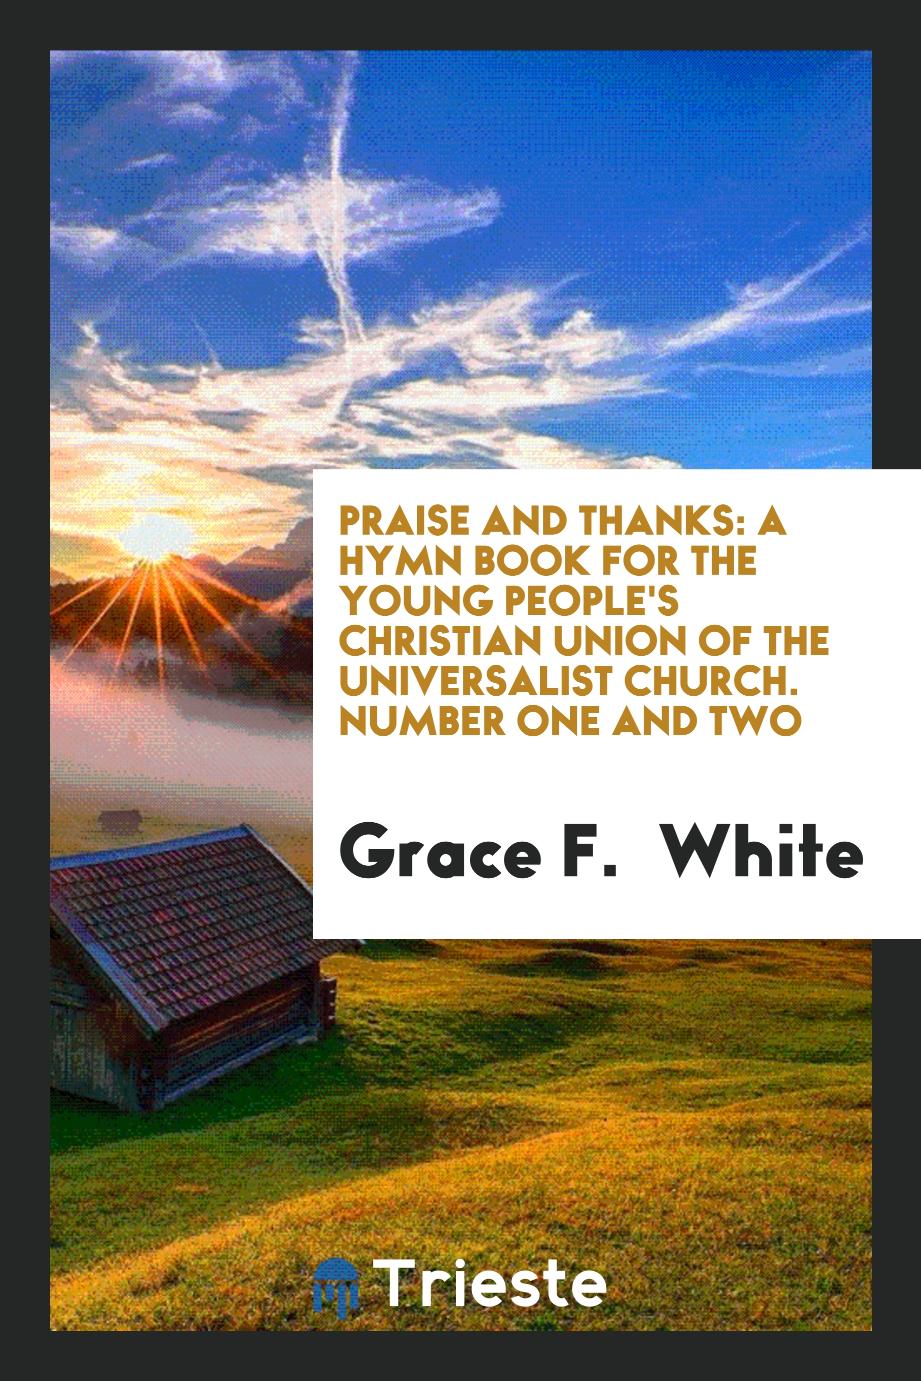 Praise and Thanks: A Hymn Book for the Young People's Christian Union of the Universalist Church. Number One and Two